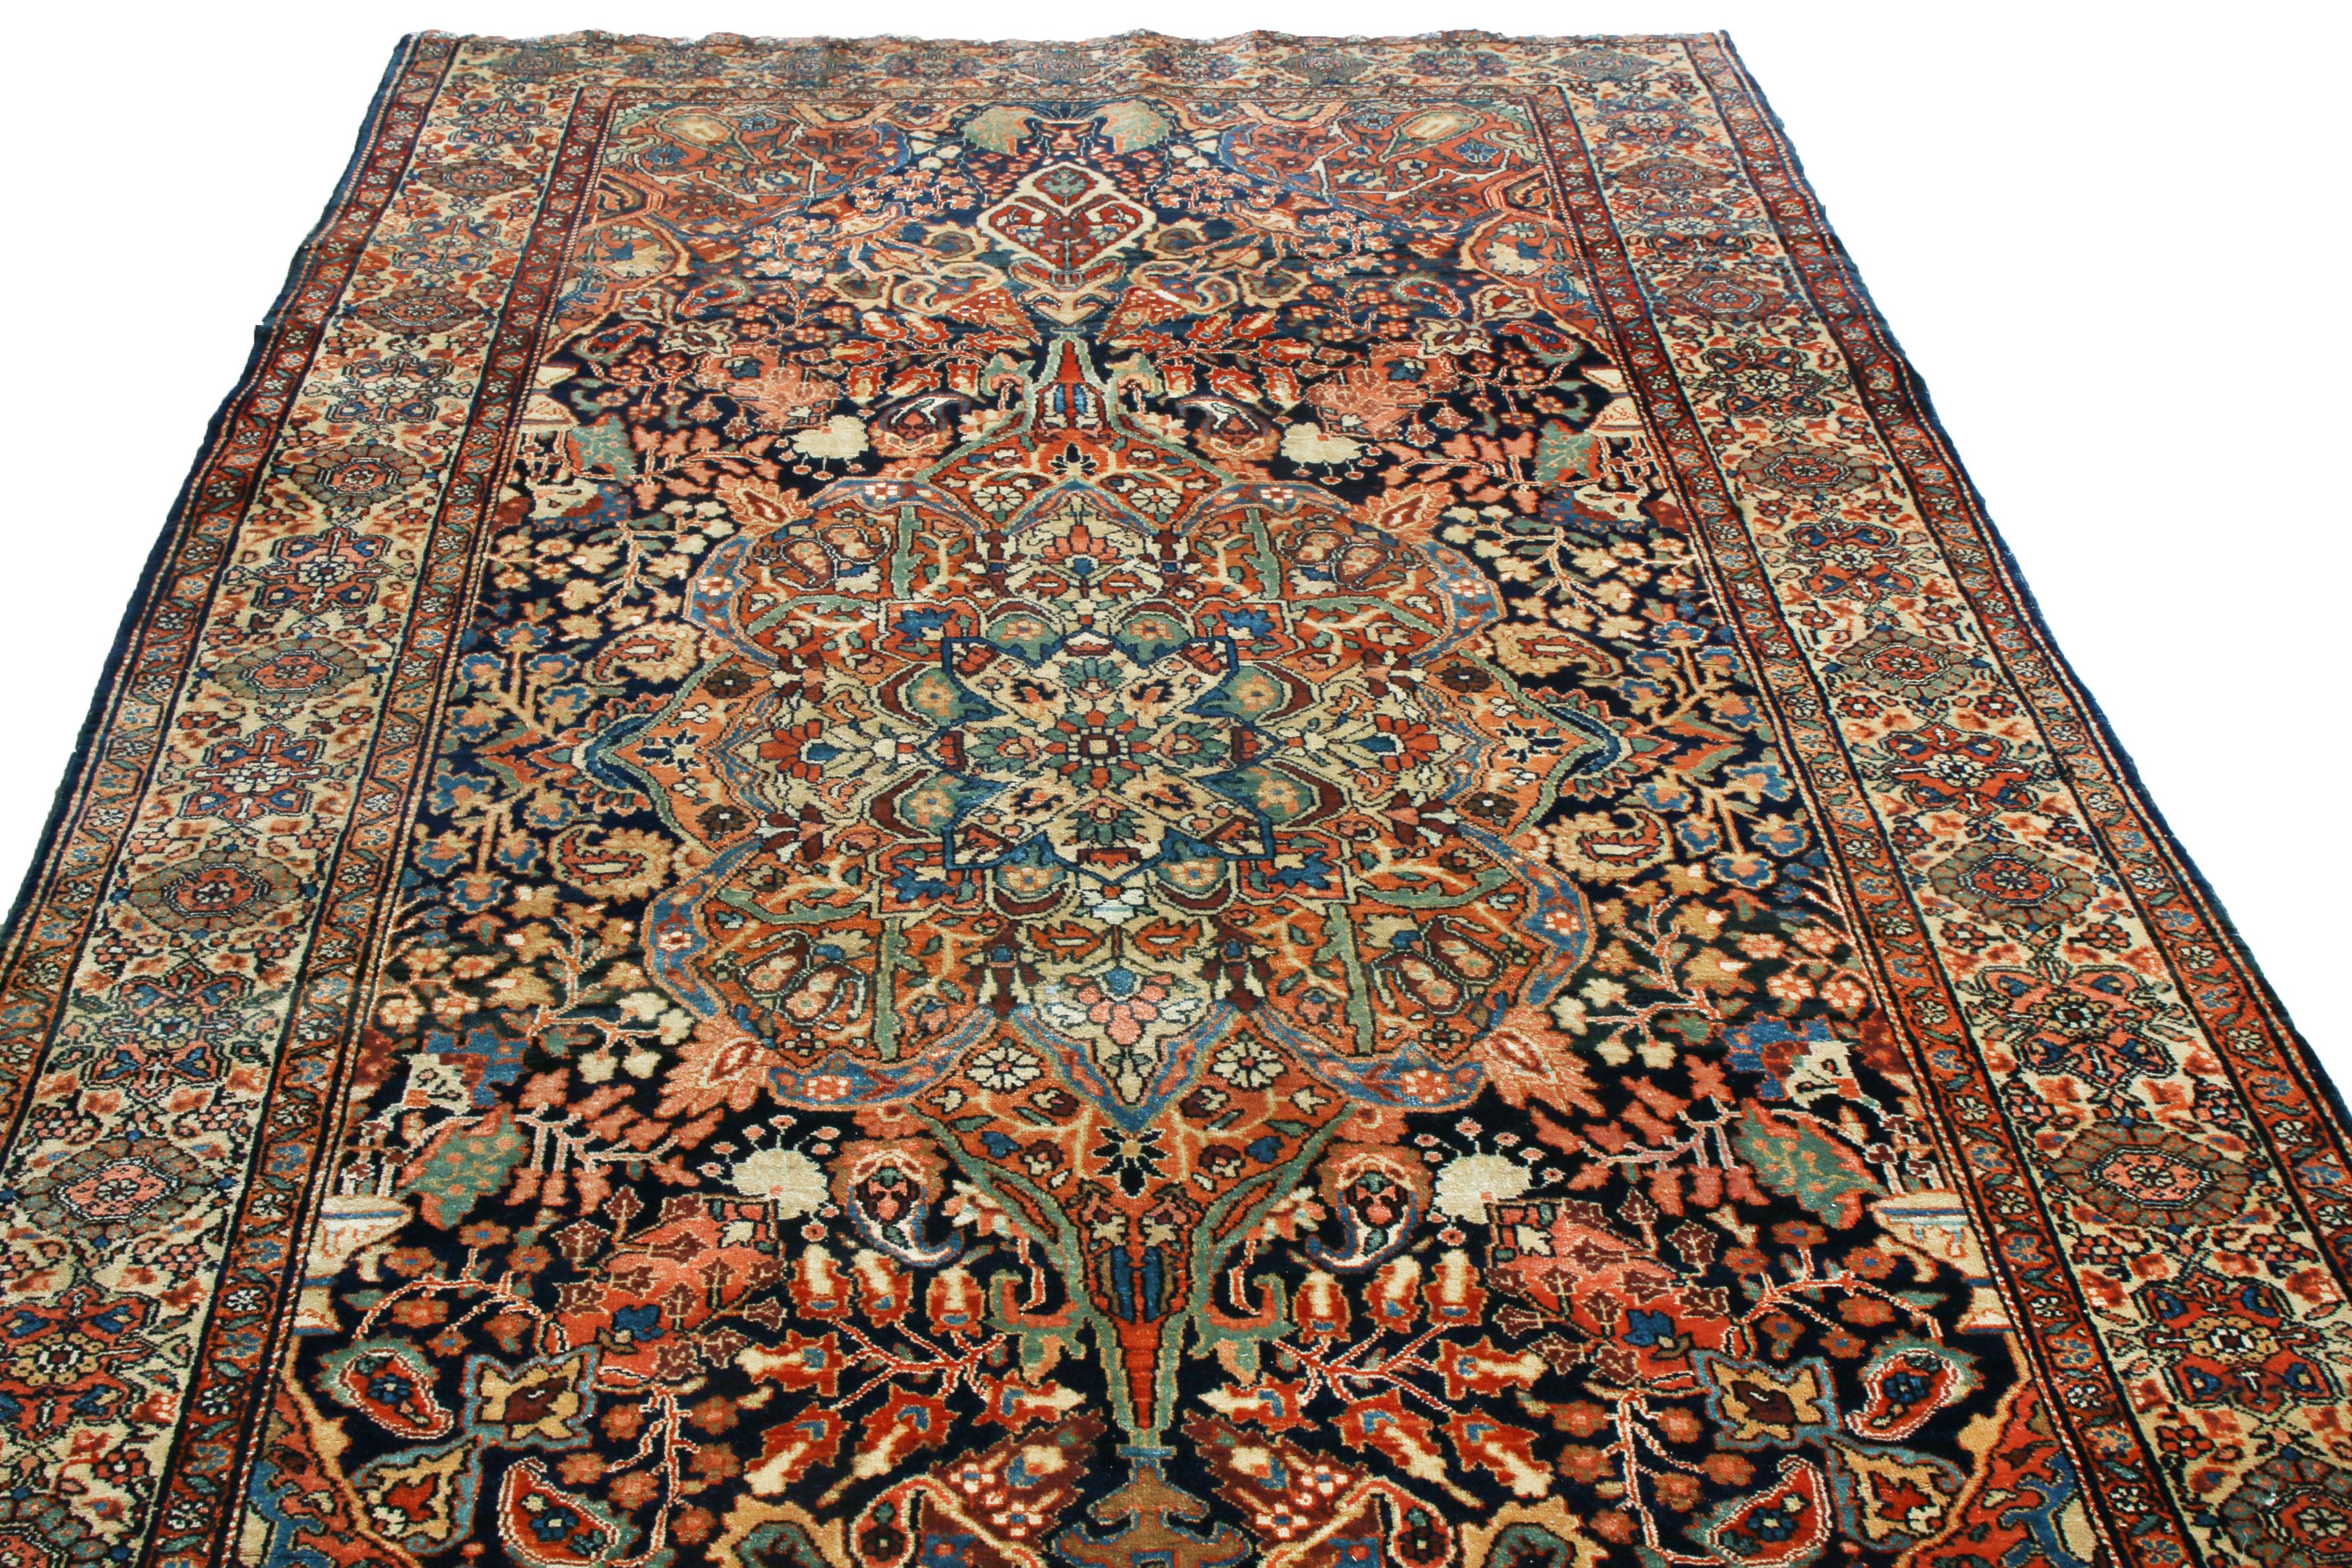 Hand knotted with high-quality wool originating from Persia between 1880-1890, this antique Sarouk Persian rug enjoys one of the most interesting varieties of patterns and colorways among its family, enjoying both earth tones and bold orange, black,